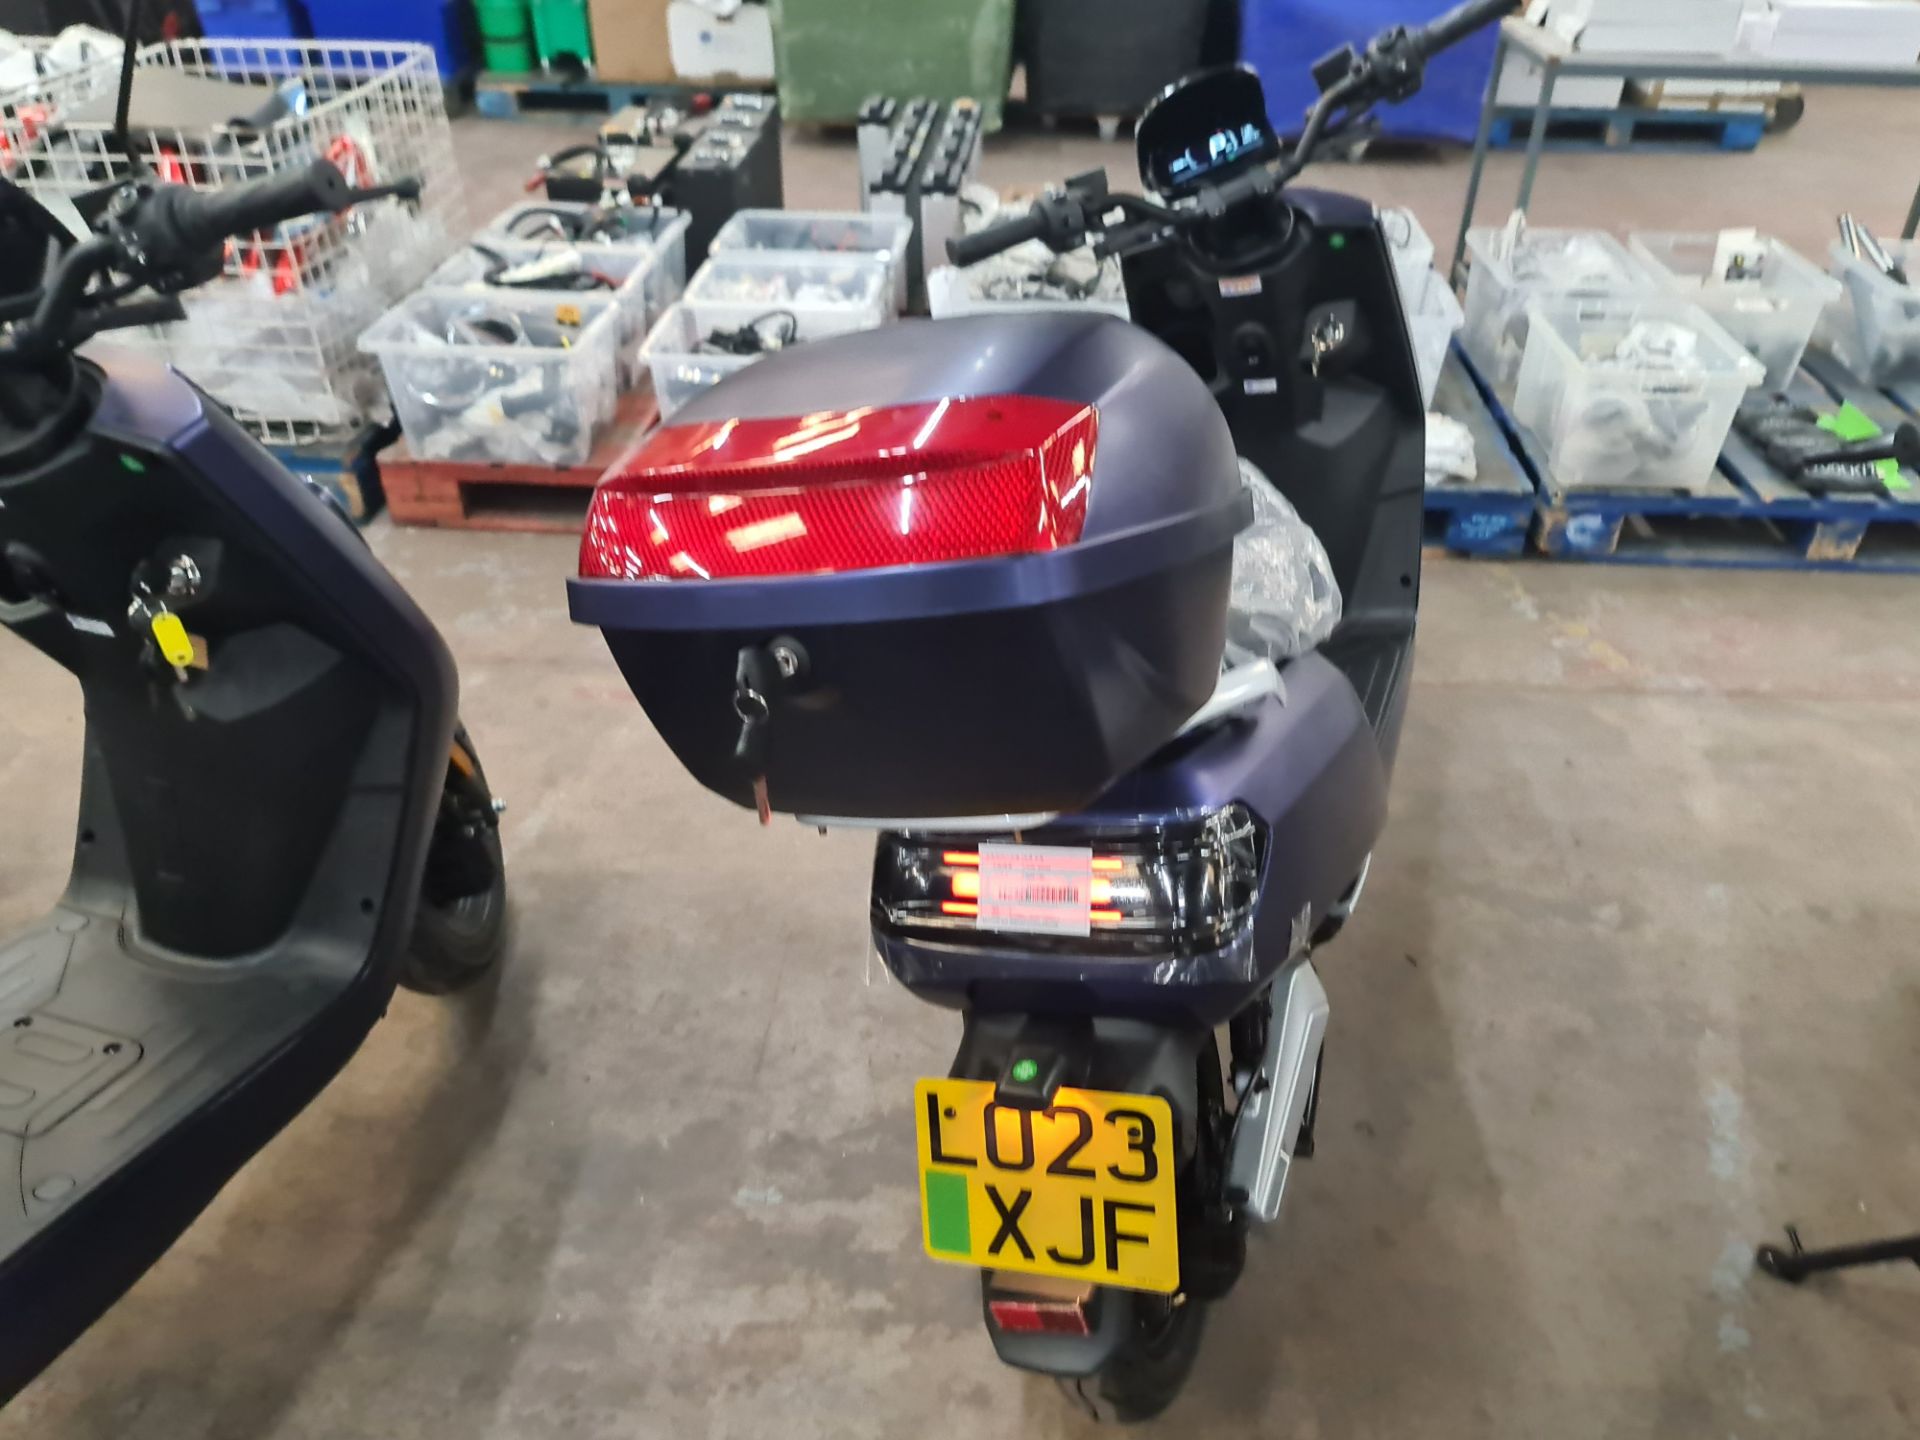 LO23 XJF Senda 3000 dual battery electric moped, colour: blue, 50cc equivalent, 30mph top speed, 90 - Image 11 of 22